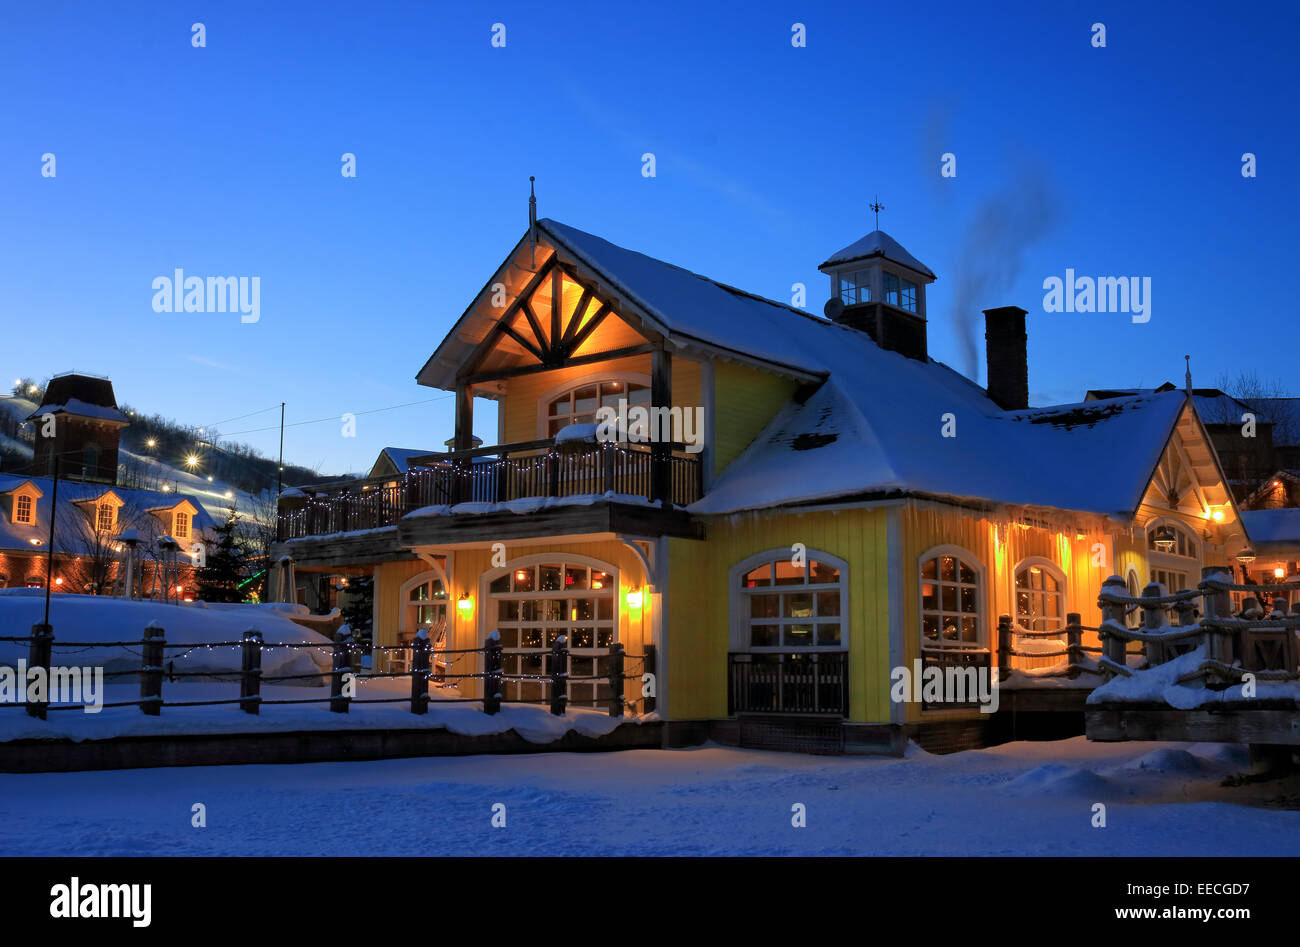 Fair tale styled Blue Mountain Village with resorts, ski slopes, and restaurants at night Stock Photo